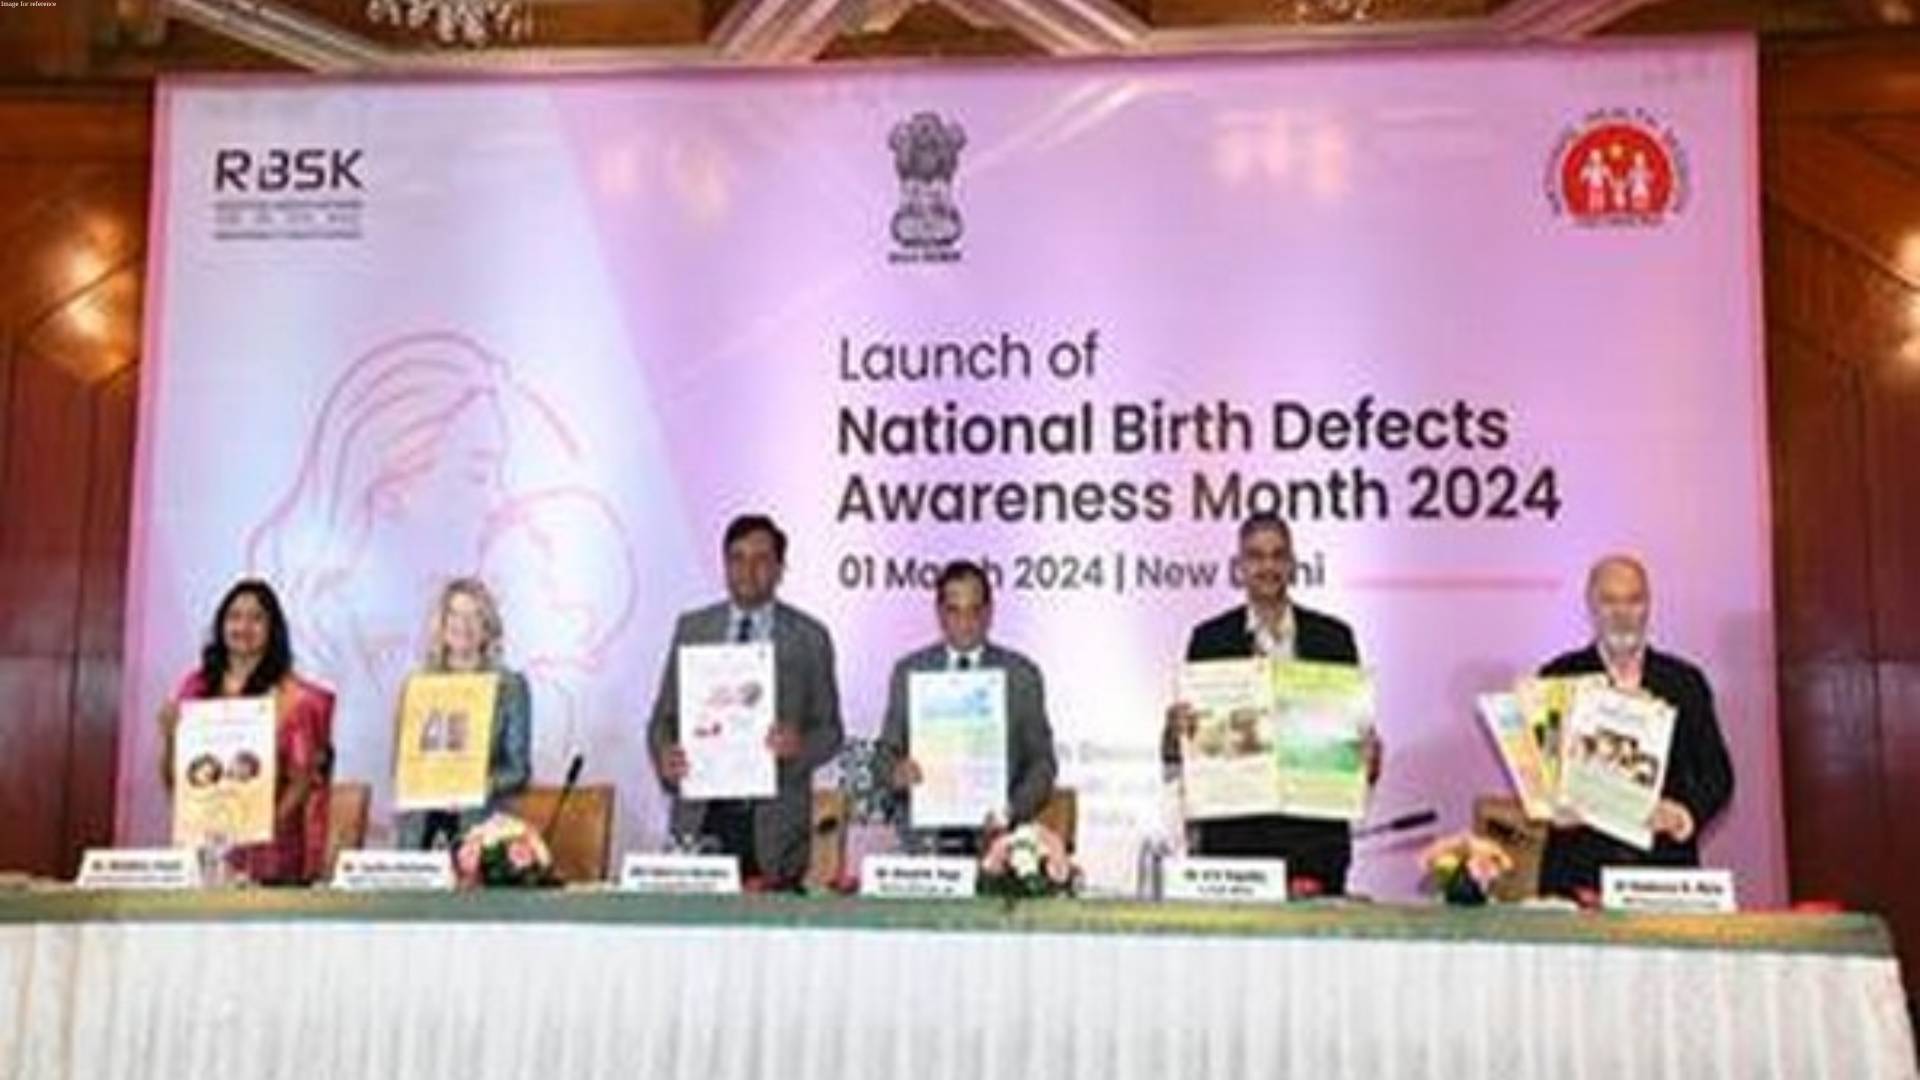 Member (Health) in NITI Aayog Dr VK Paul launches National Birth Defect Awareness Month 2024